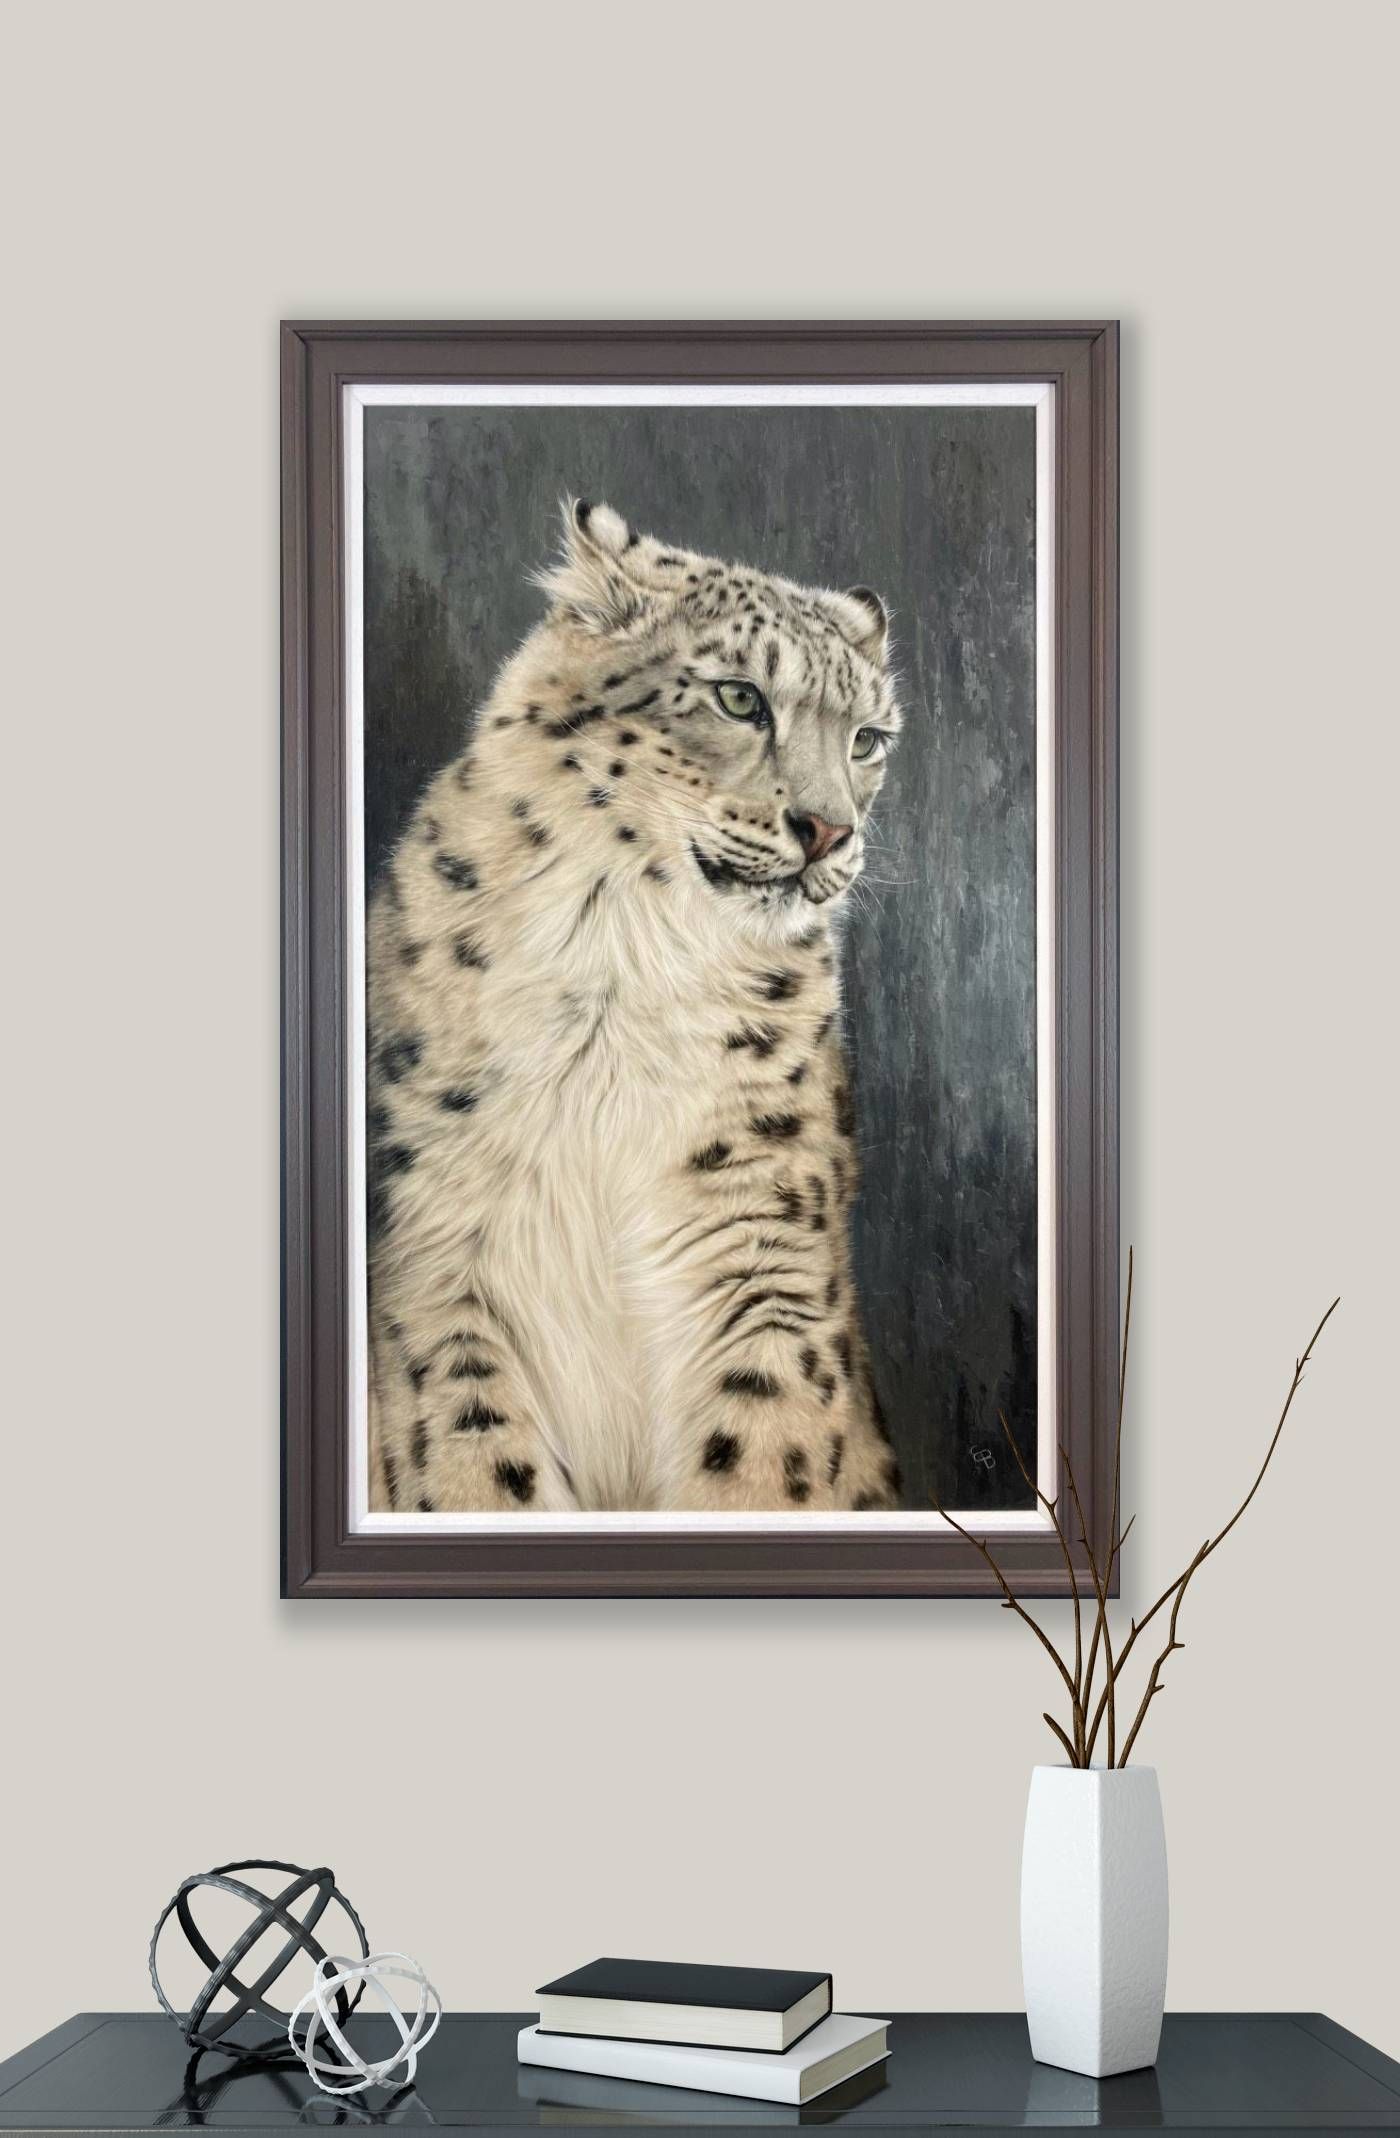 Snow Leopard by Emma Bowring